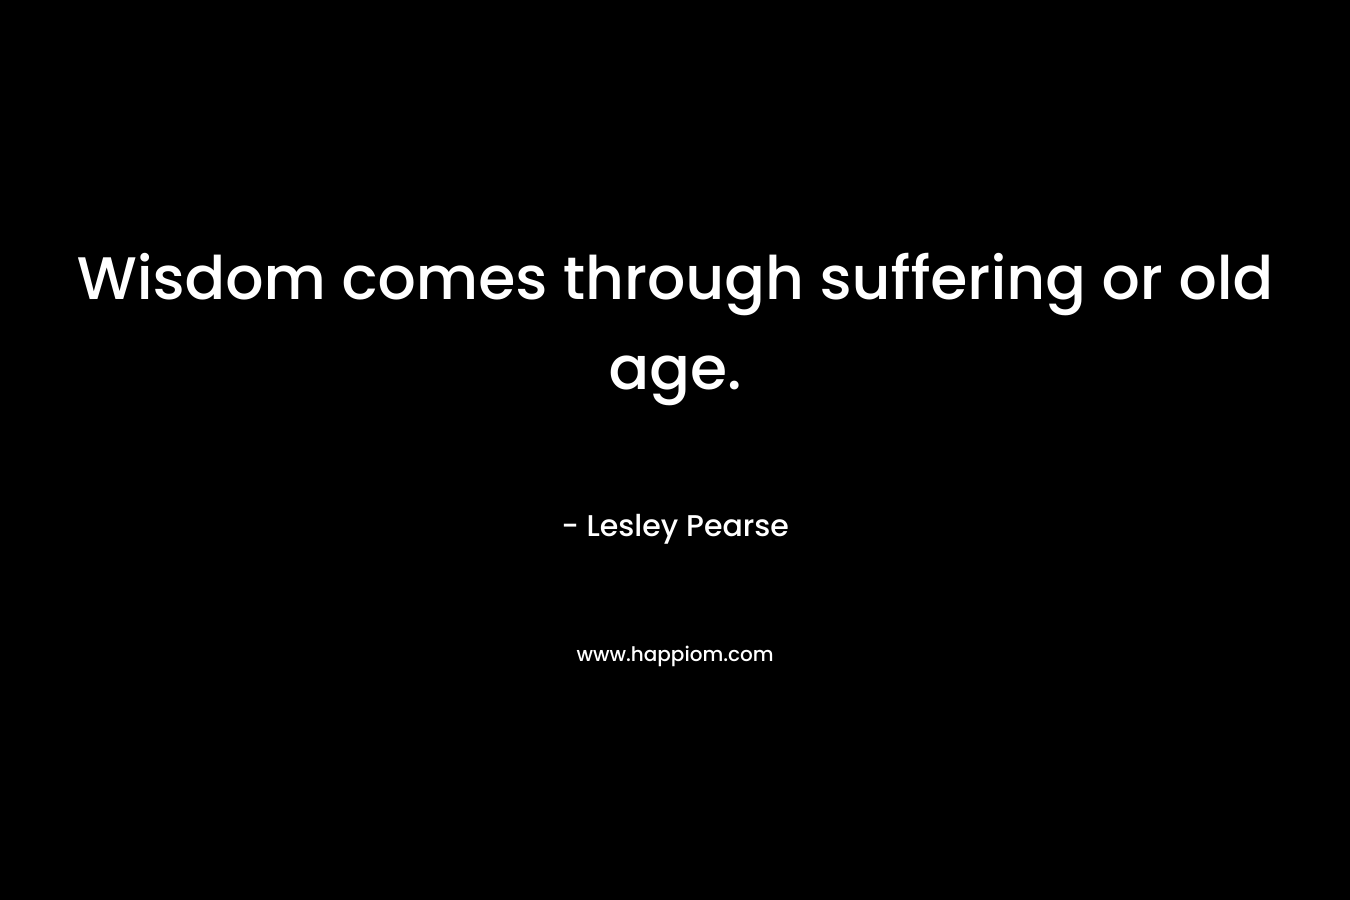  Wisdom comes through suffering or old age. 